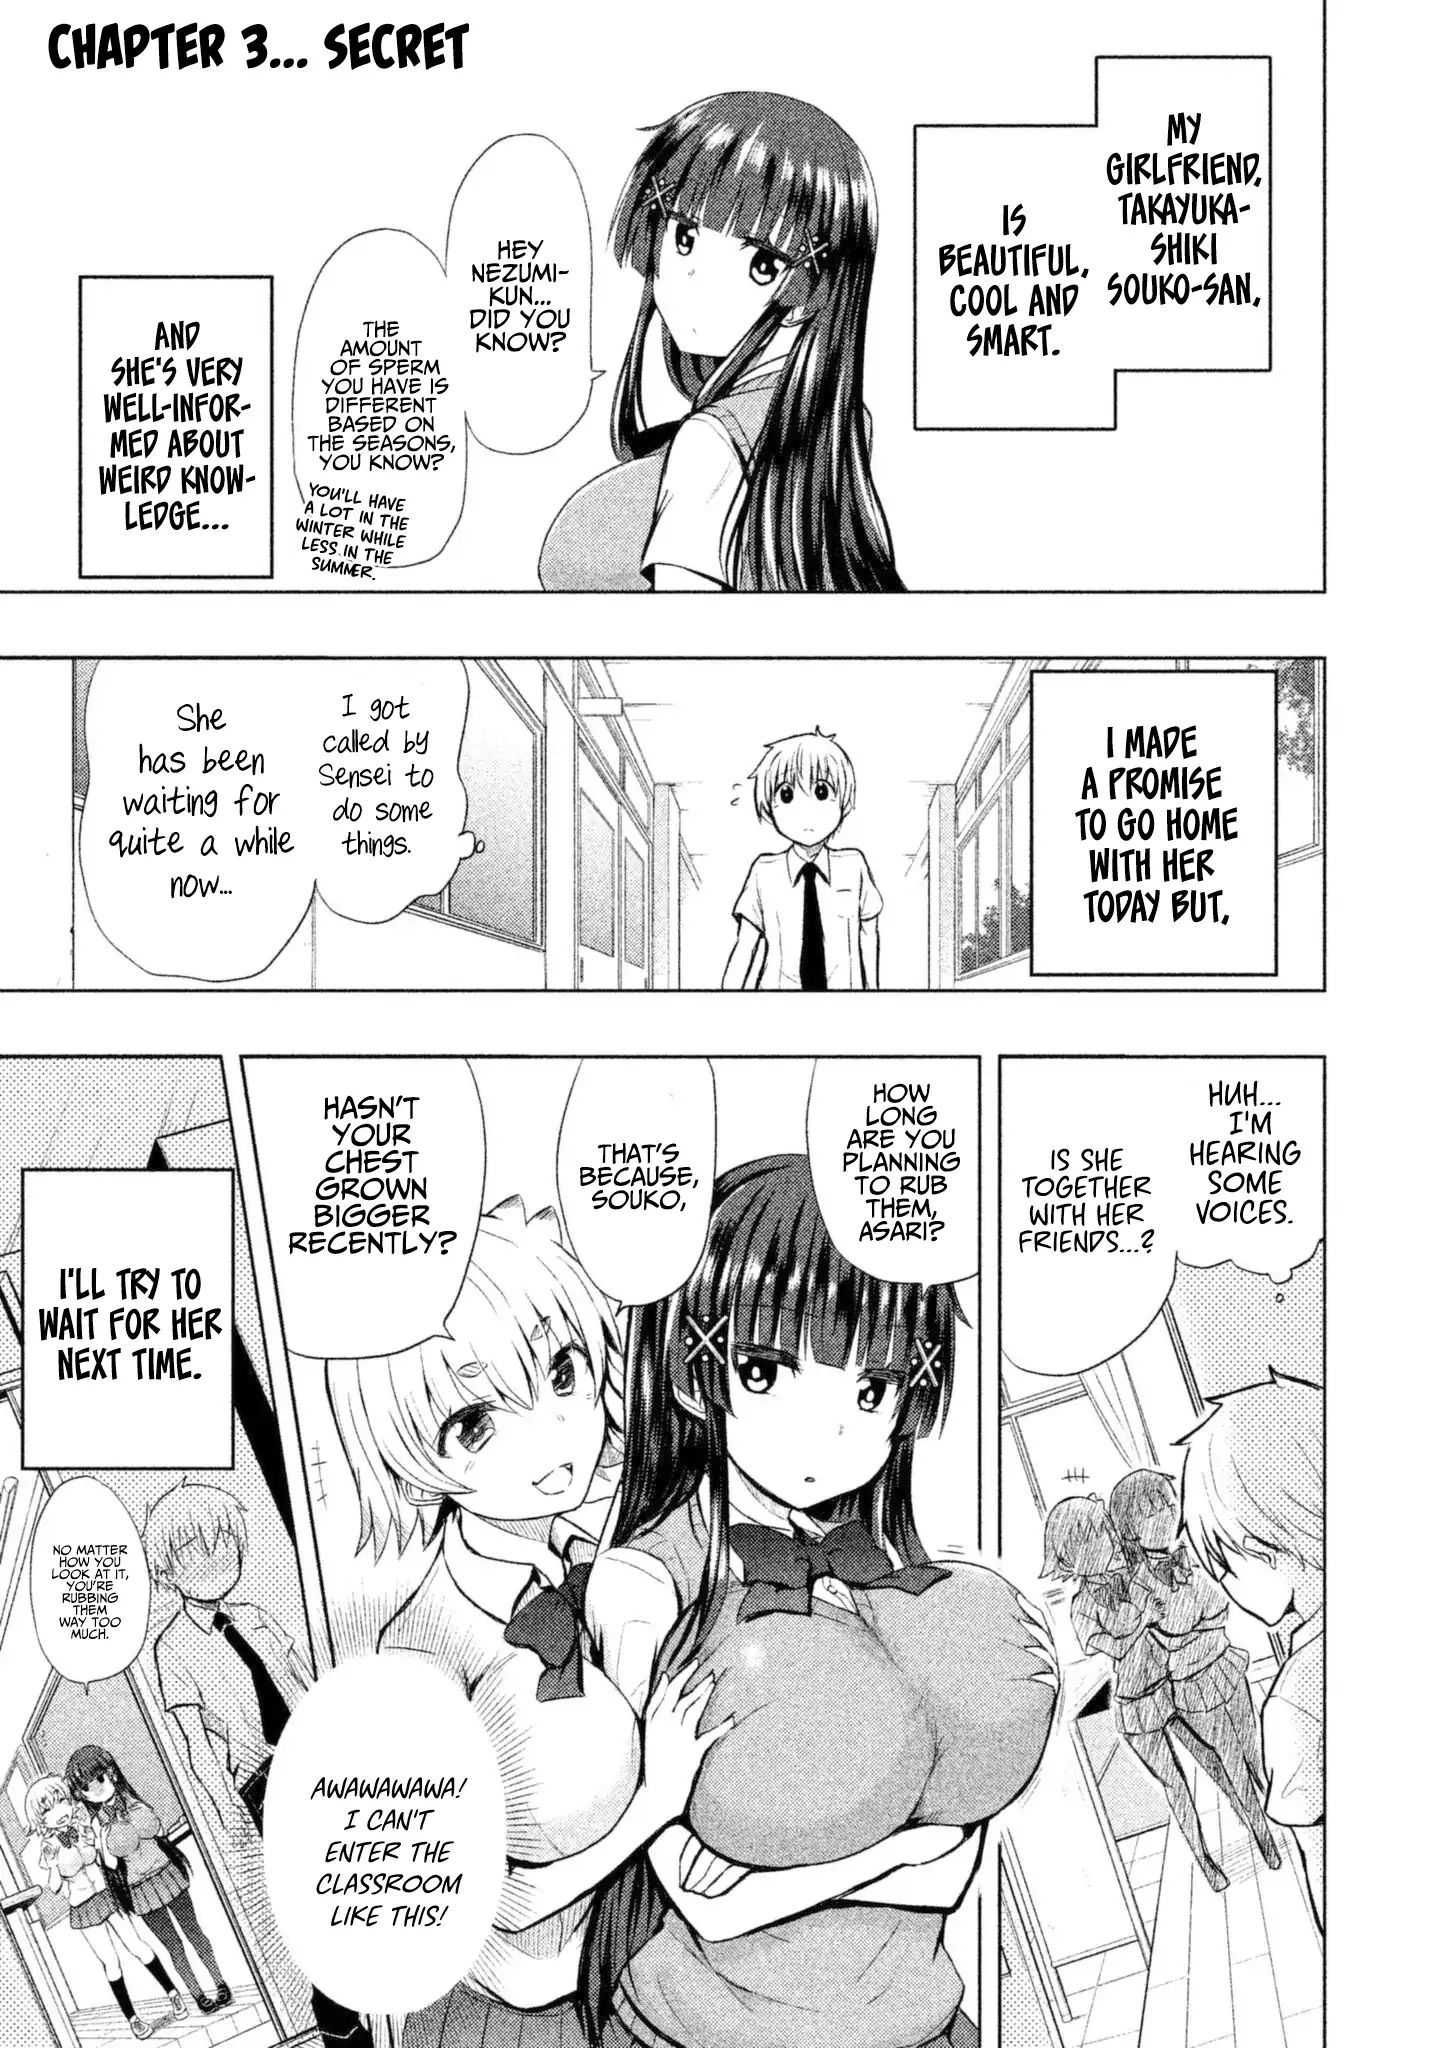 A Girl Who Is Very Well-Informed About Weird Knowledge, Takayukashiki Souko-San Chapter 3 #2